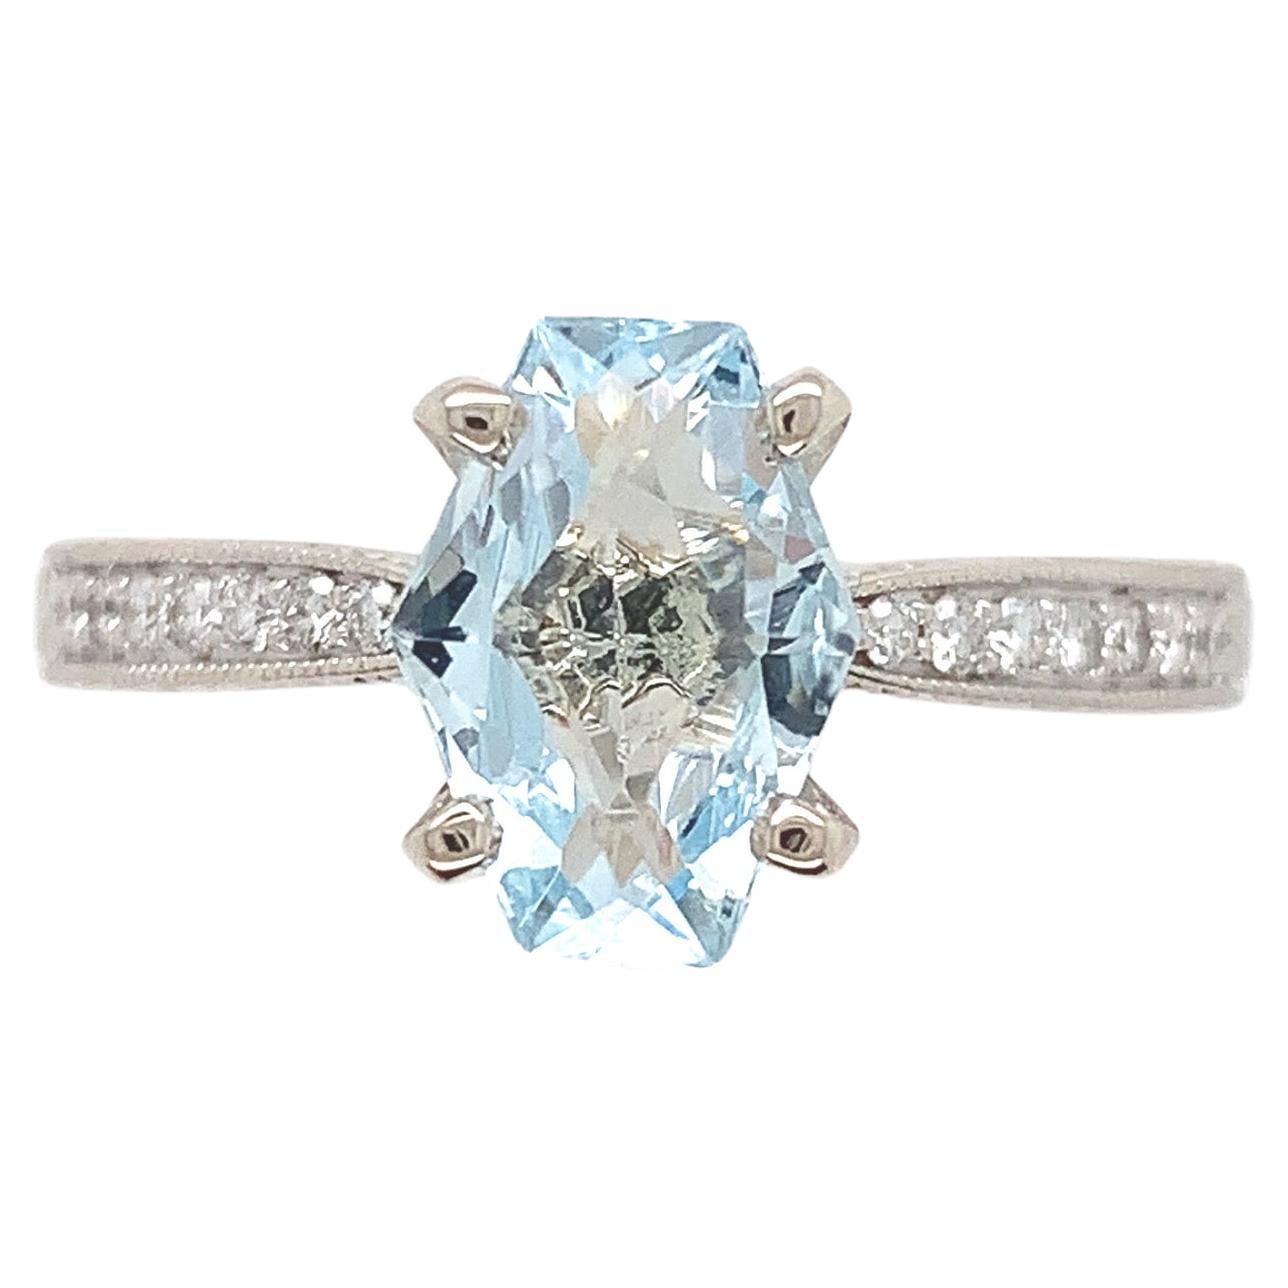 14K White gold Ring featuring a Specialty Cut Aquamarine Hand Engraved